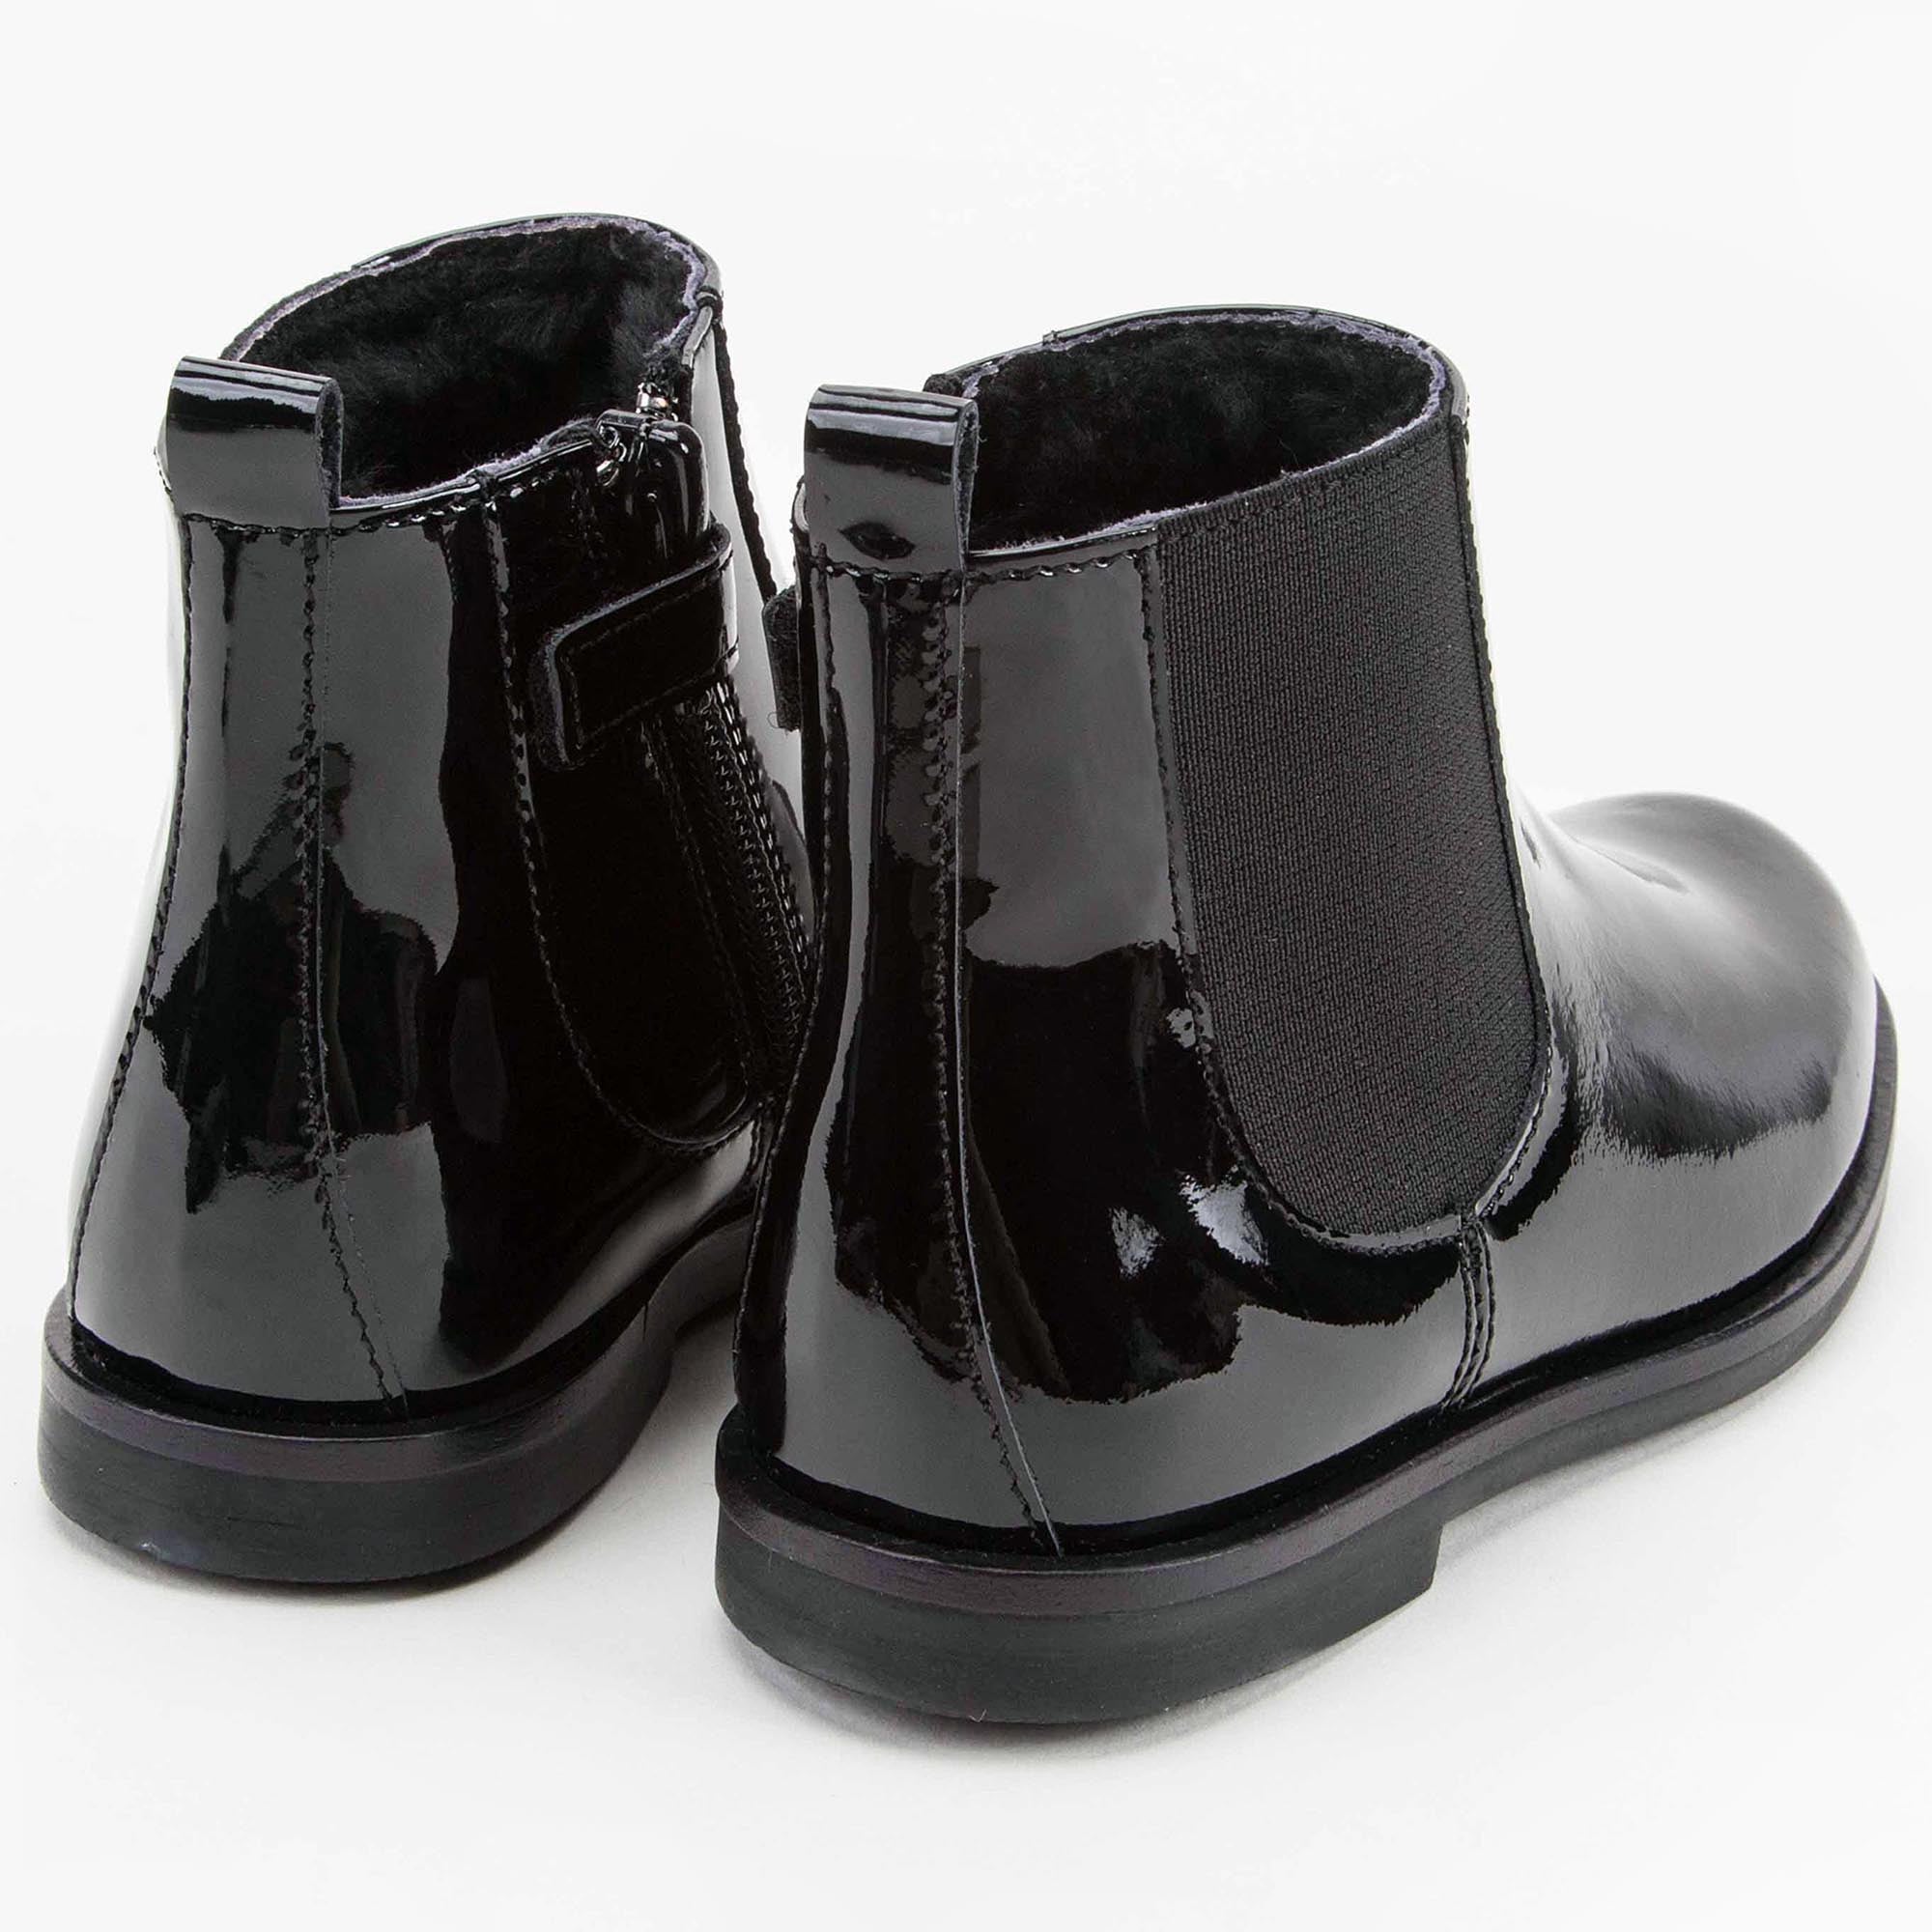 Girls Black Patent Leather Ankle Boots With Wool